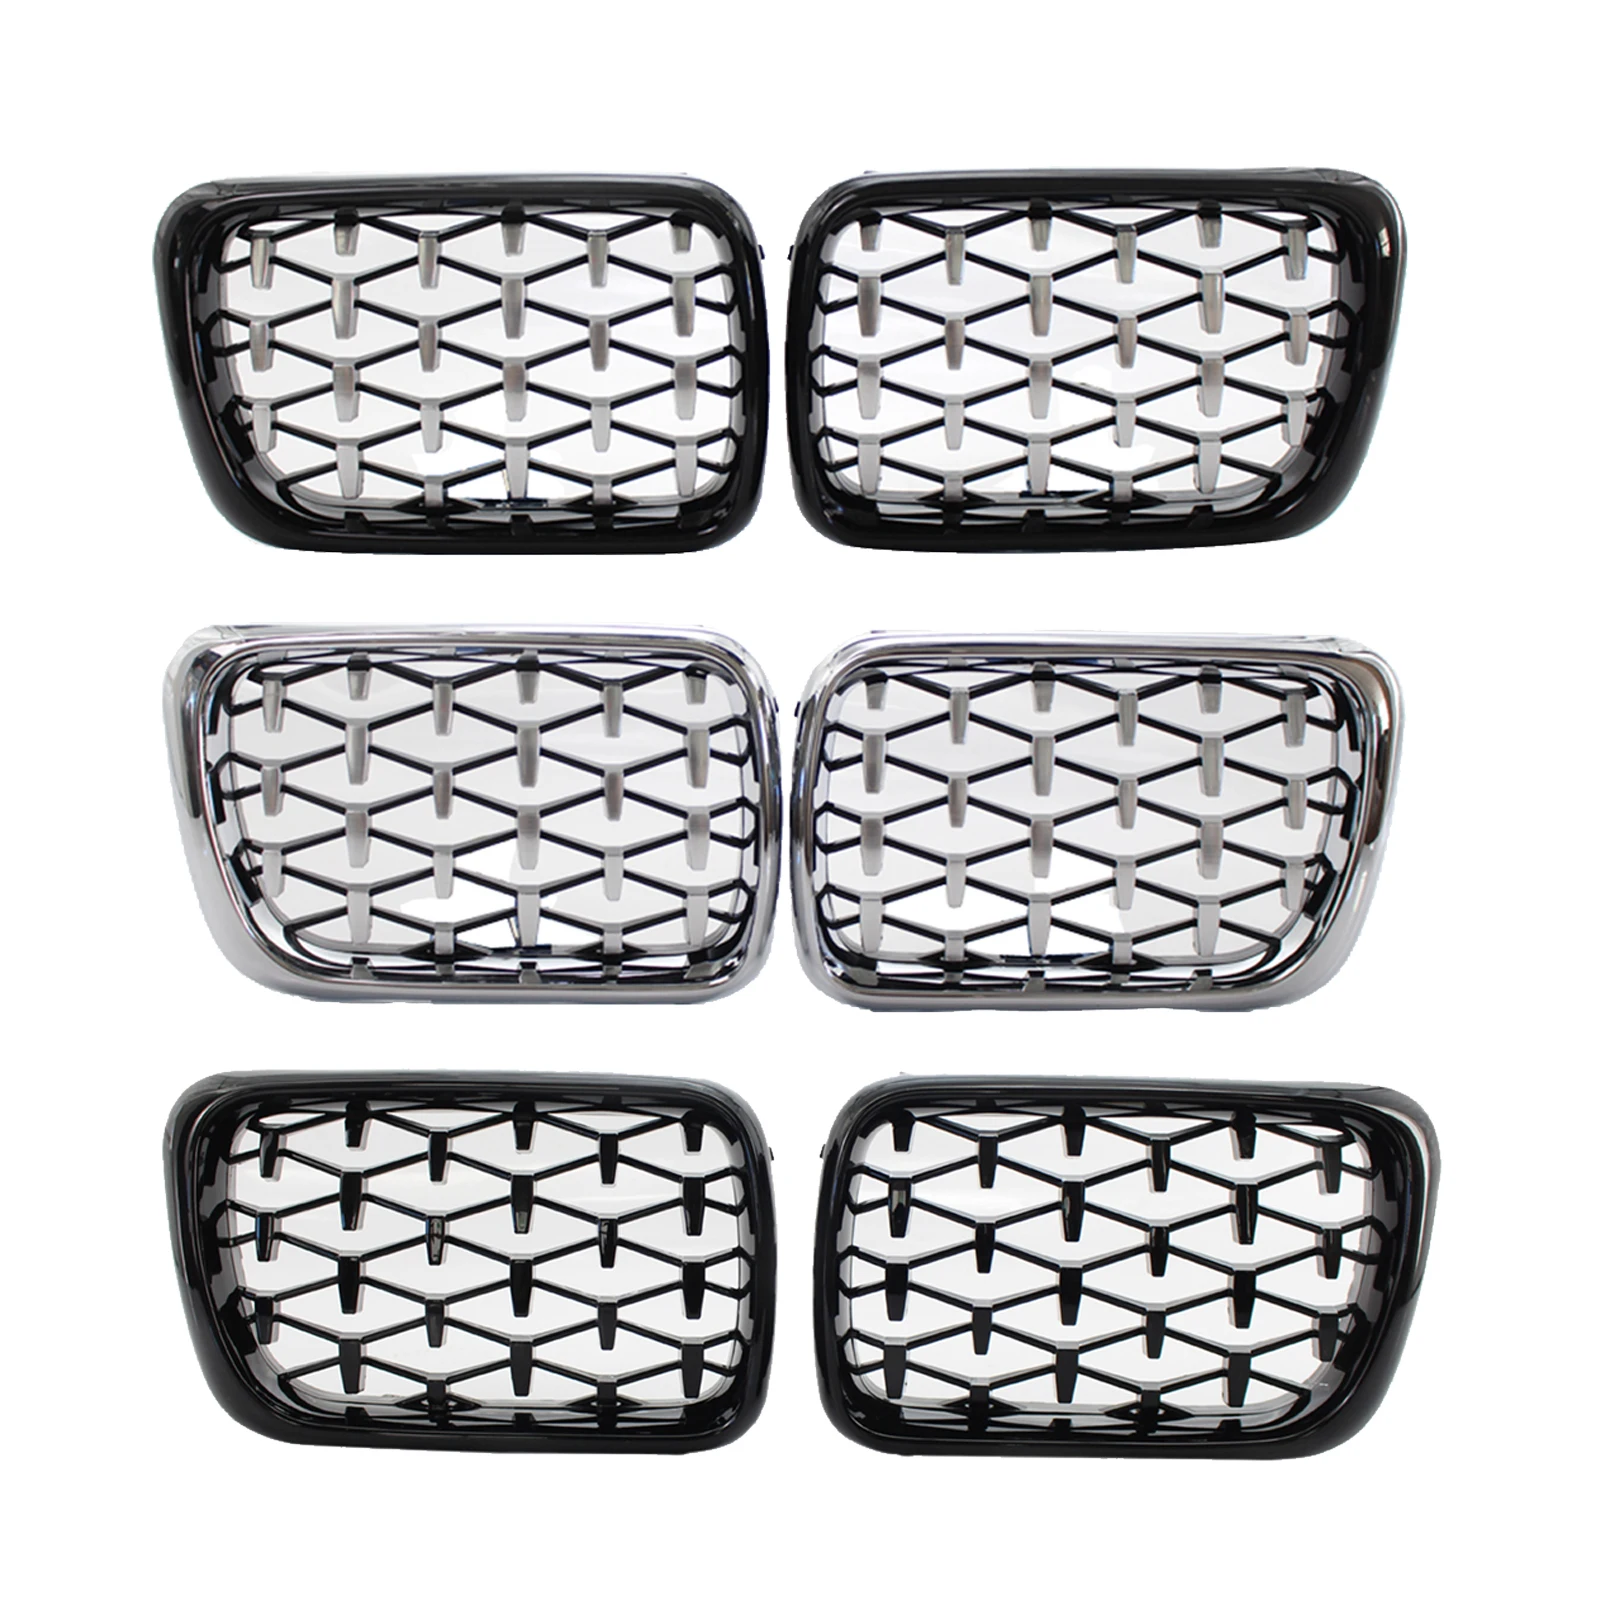 2 pcs Auto Car Front Bumper Kidney Grill for 997-1999, , Comes As A Pair.